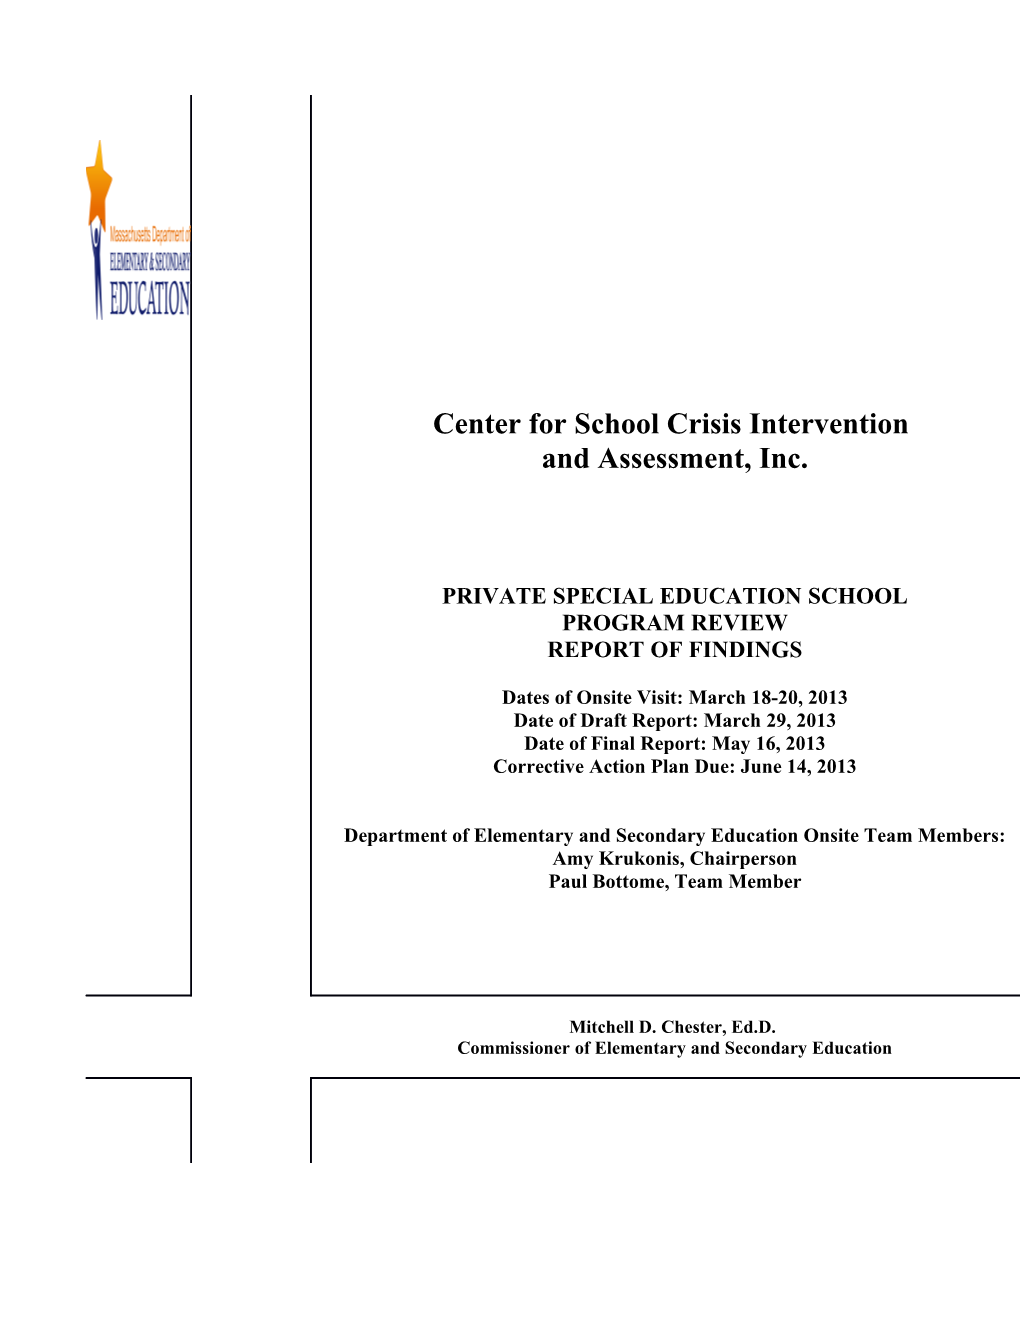 Center for School Crisis Intervention and Assessment, Inc. CPR Final Report 2013